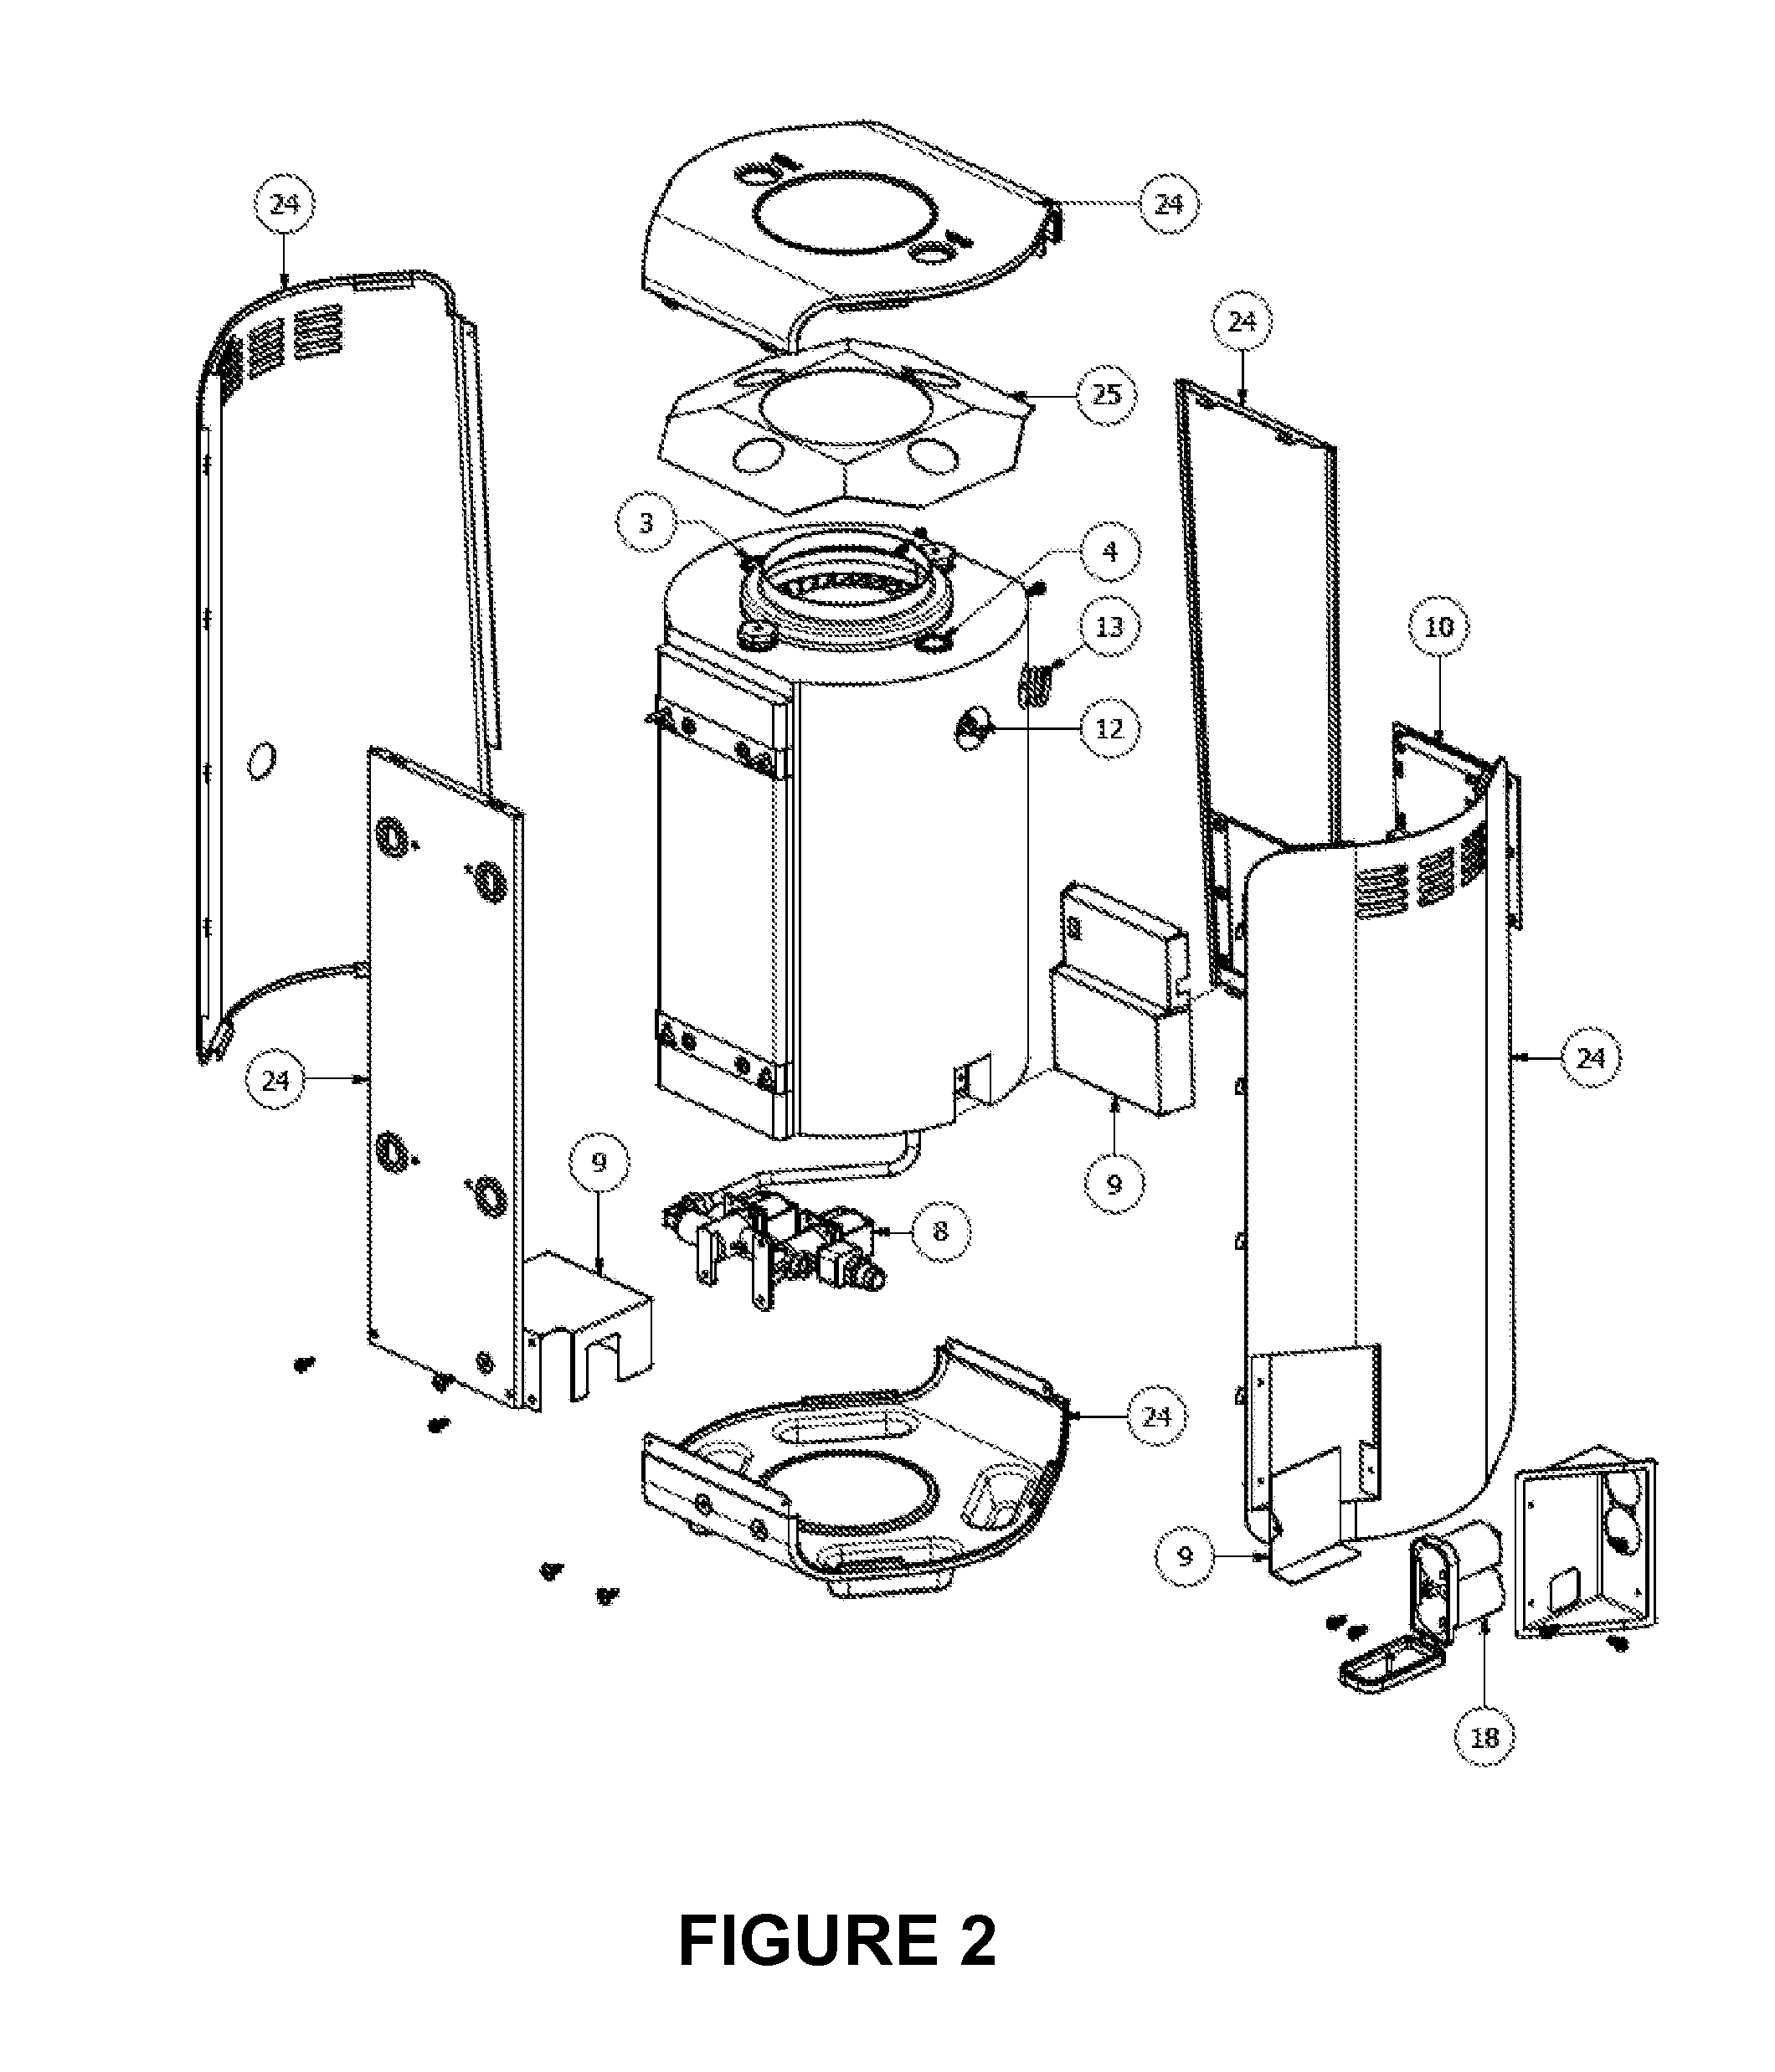 Electronically-Controlled Tankless Water Heater with Pilotless Ignition